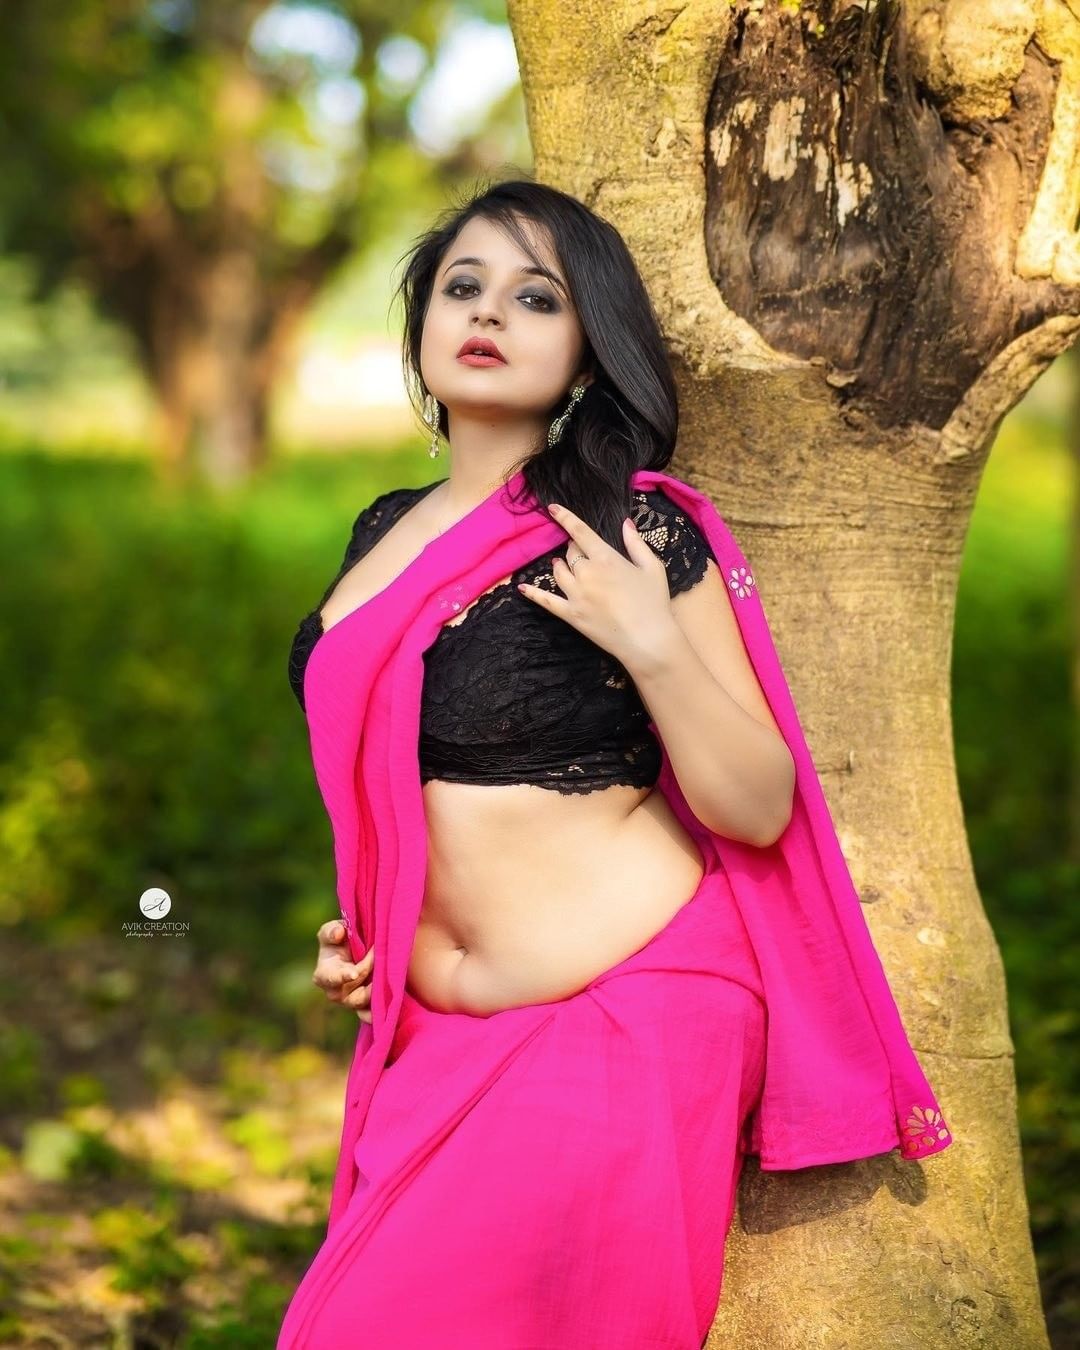 Indian Call Girls in Downtown	+971545205154